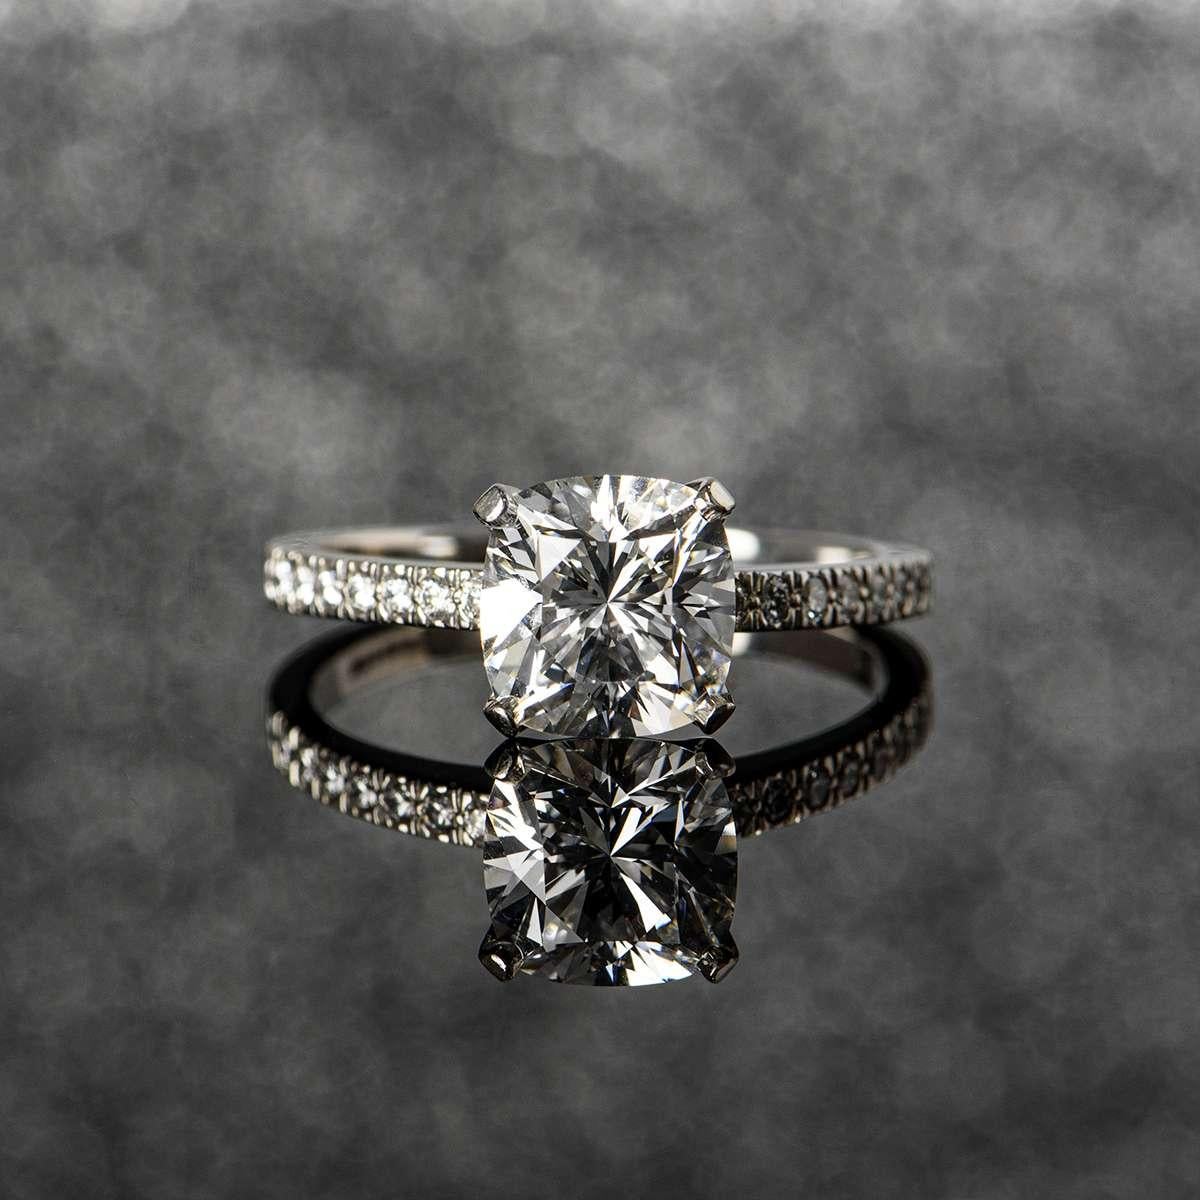 Tiffany & Co. Platinum Cushion Cut Diamond Novo Ring 2.22 Carat G/VVS1 In Excellent Condition For Sale In London, GB